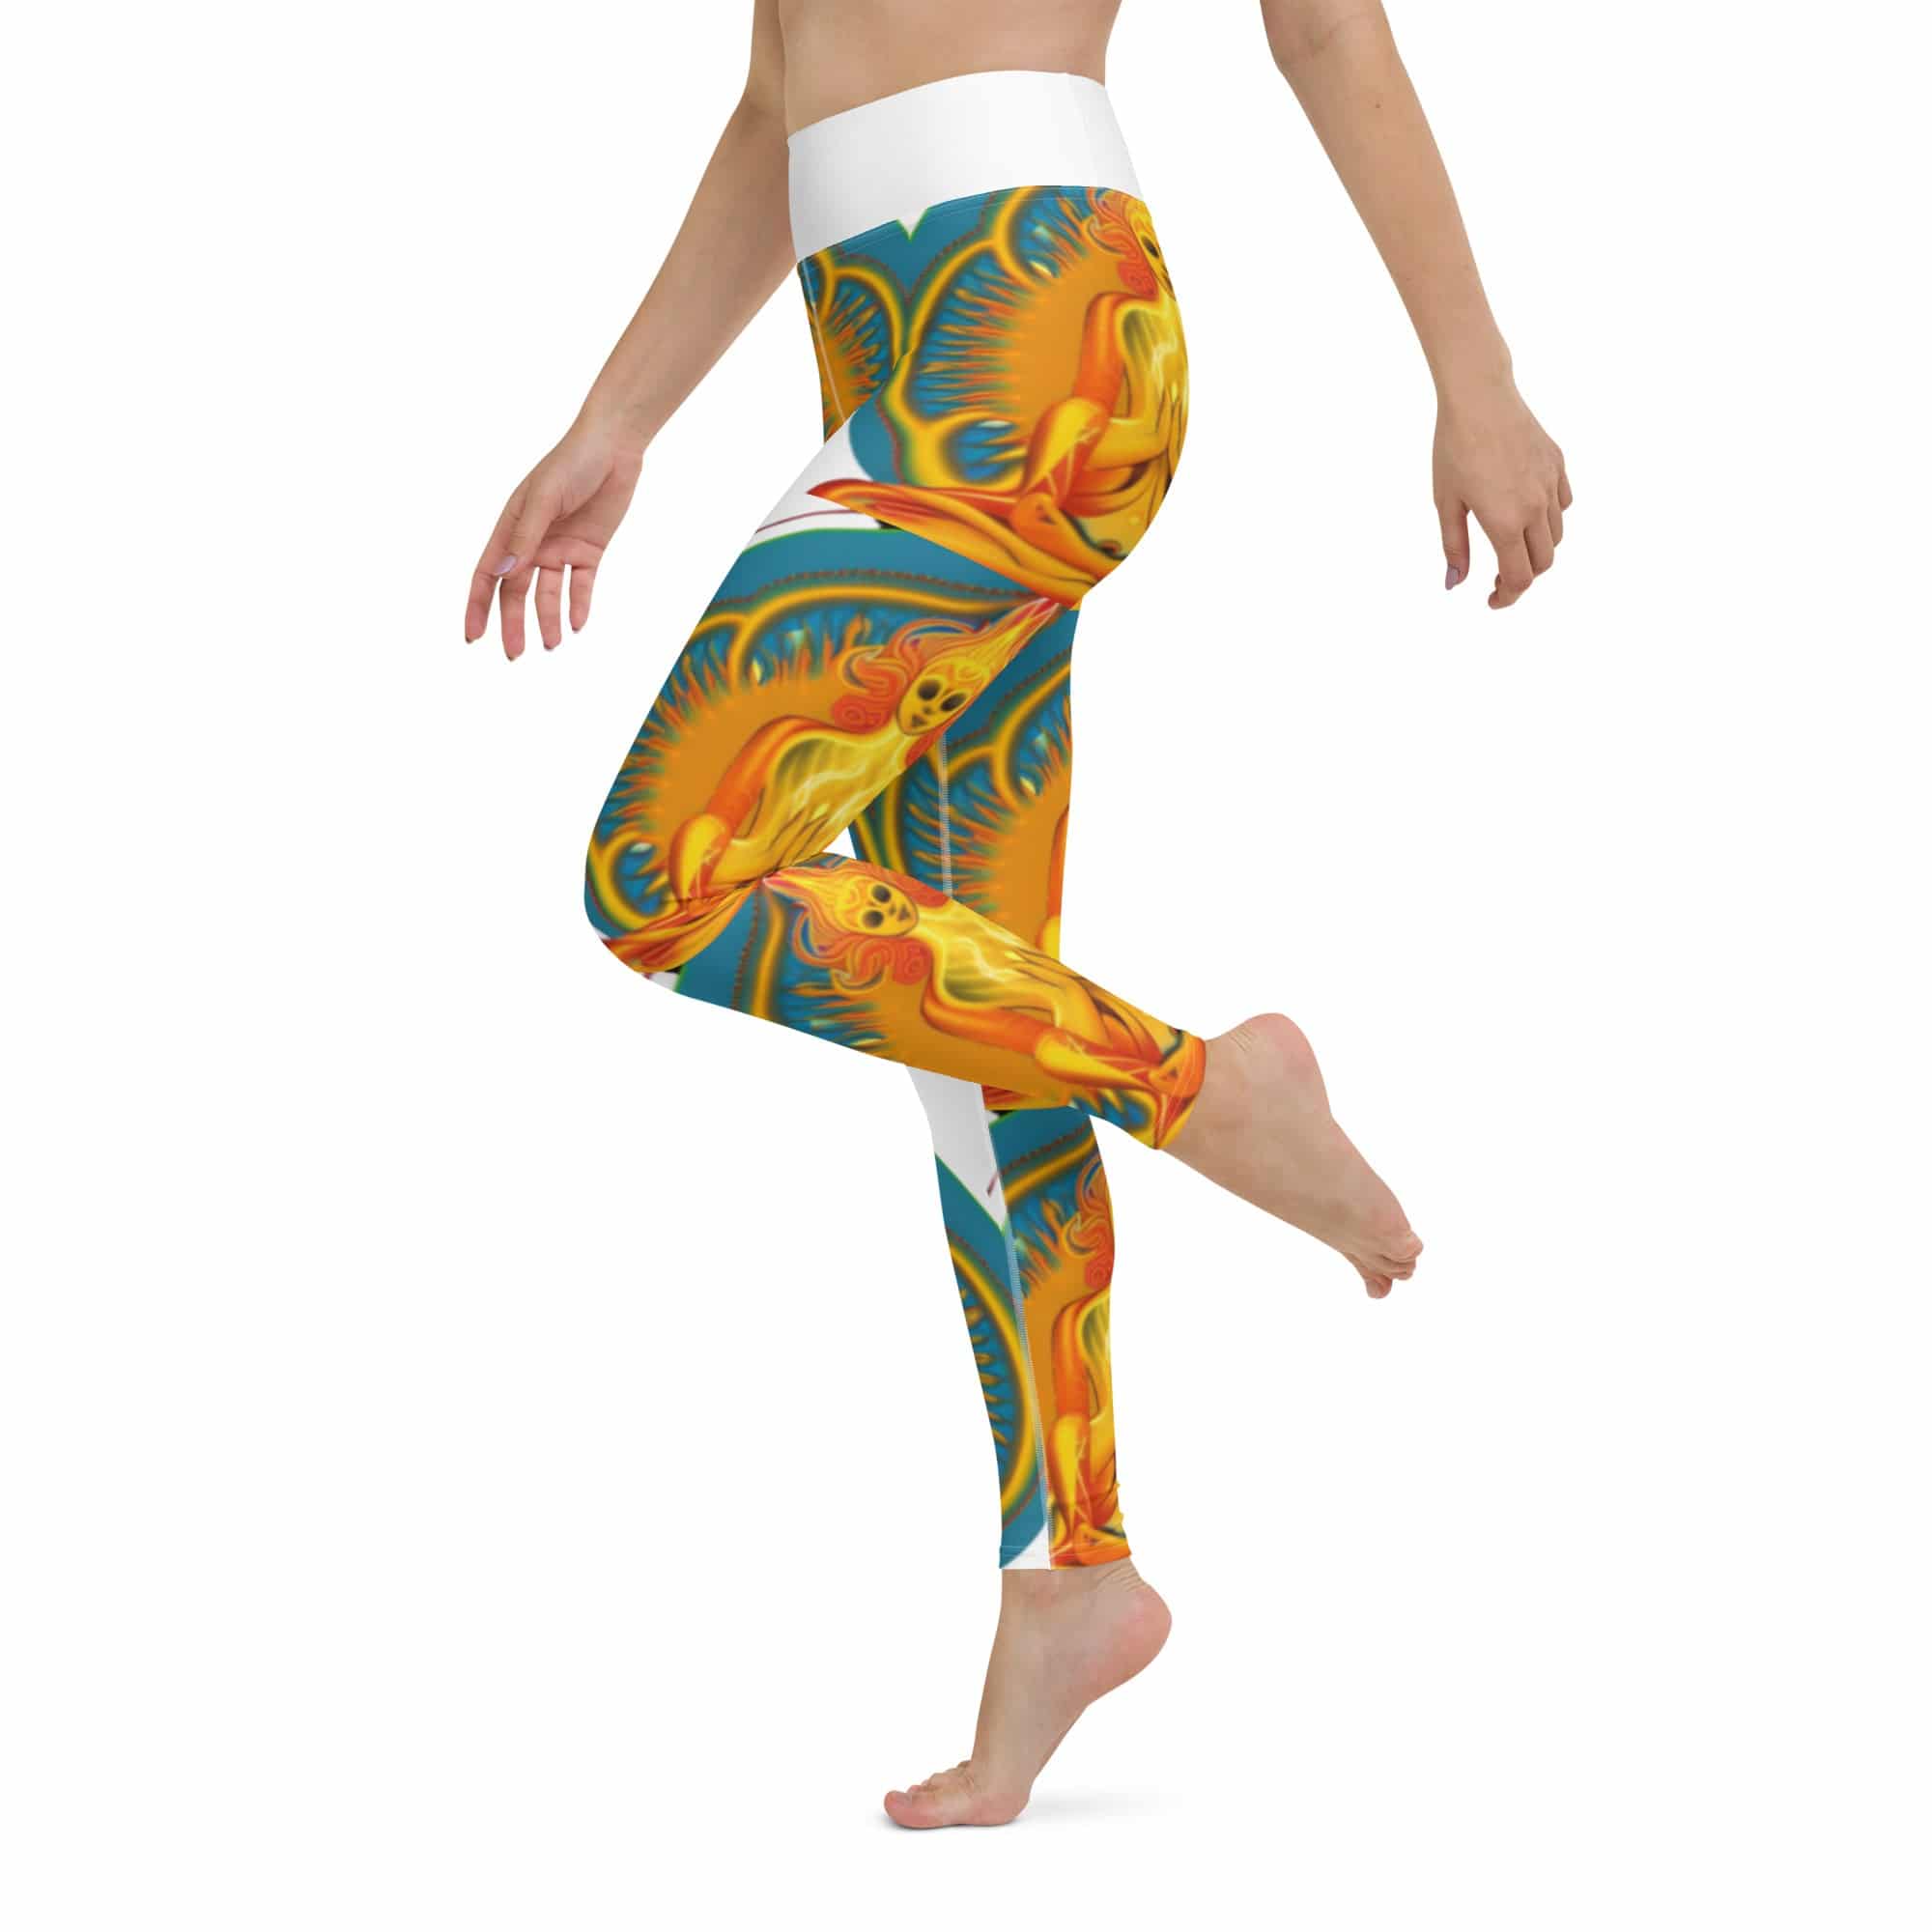 Goddess of Beauty Leggings - Where Your Body Becomes a Canvas for the Universe - Awaken the Divinity Within You - Guy Christopher